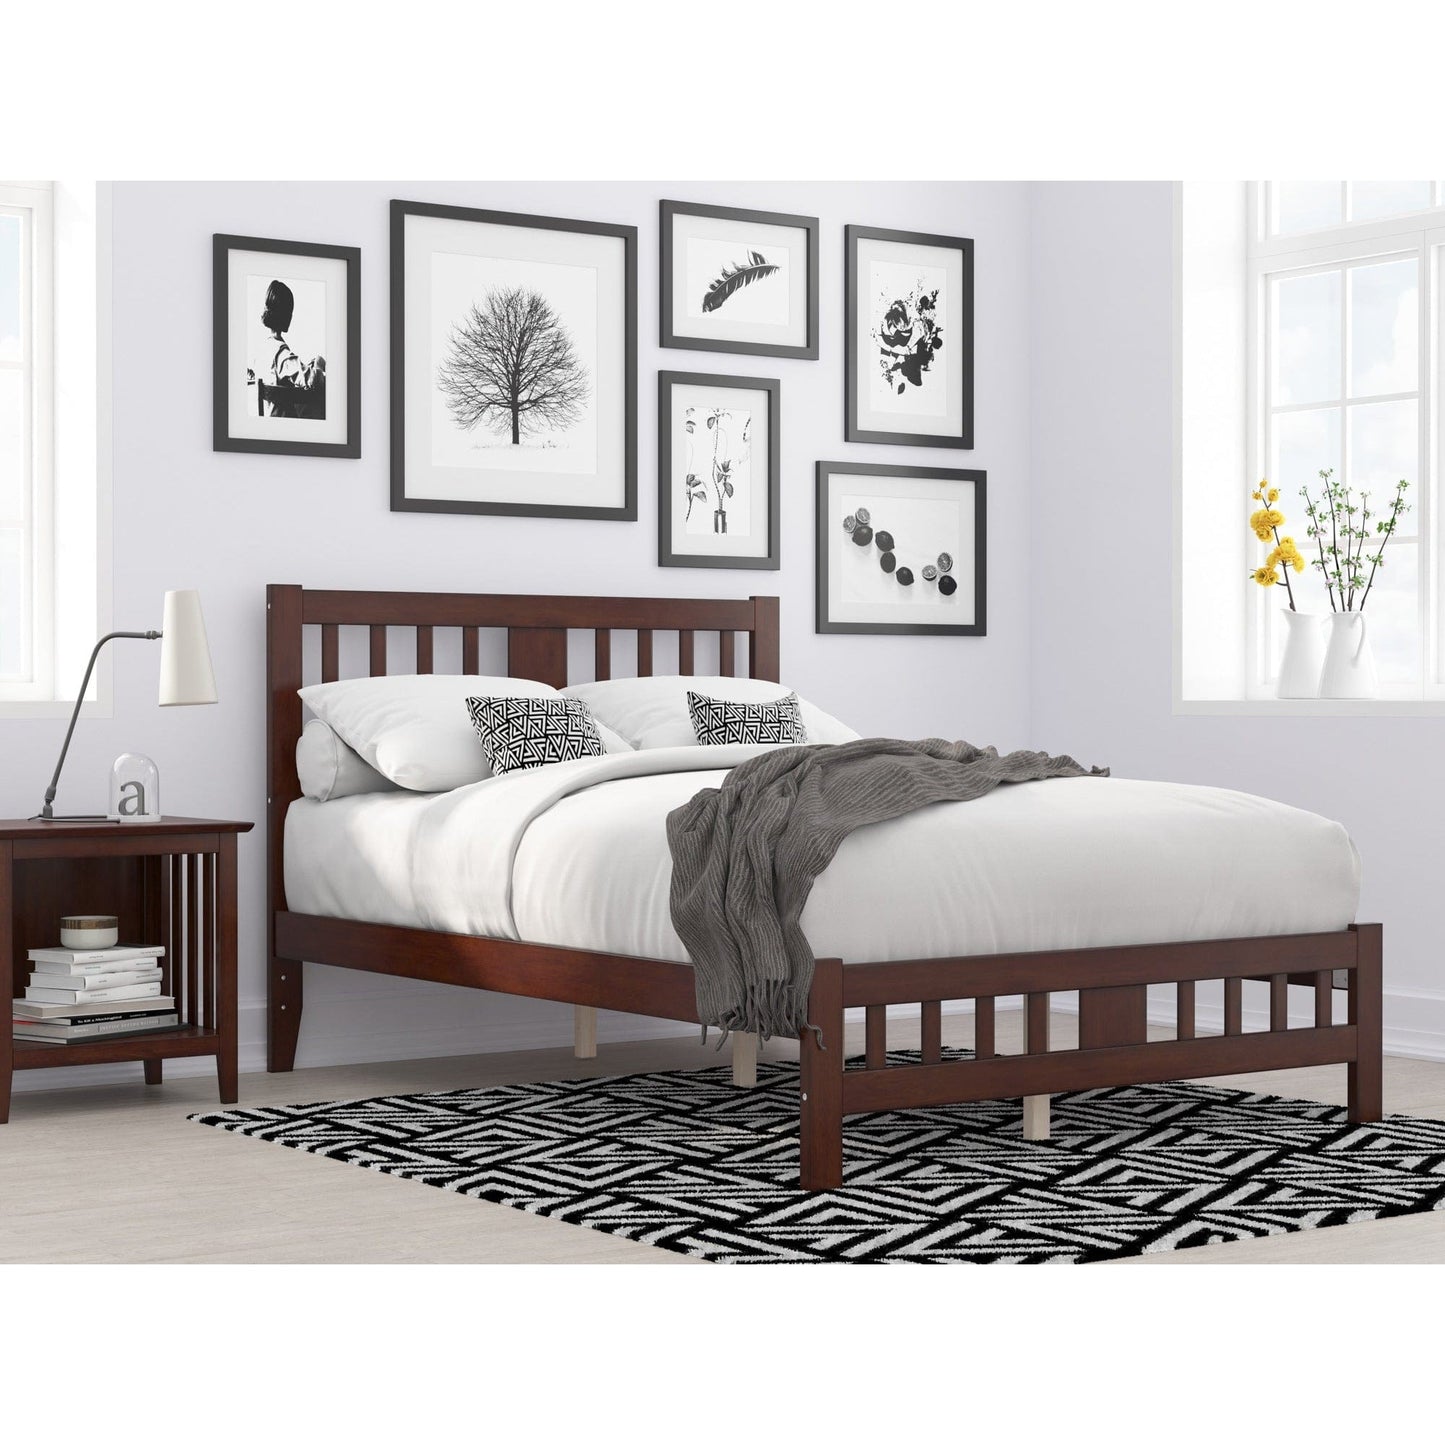 AFI Furnishings Tahoe Full Bed with Footboard in Walnut AG8960034